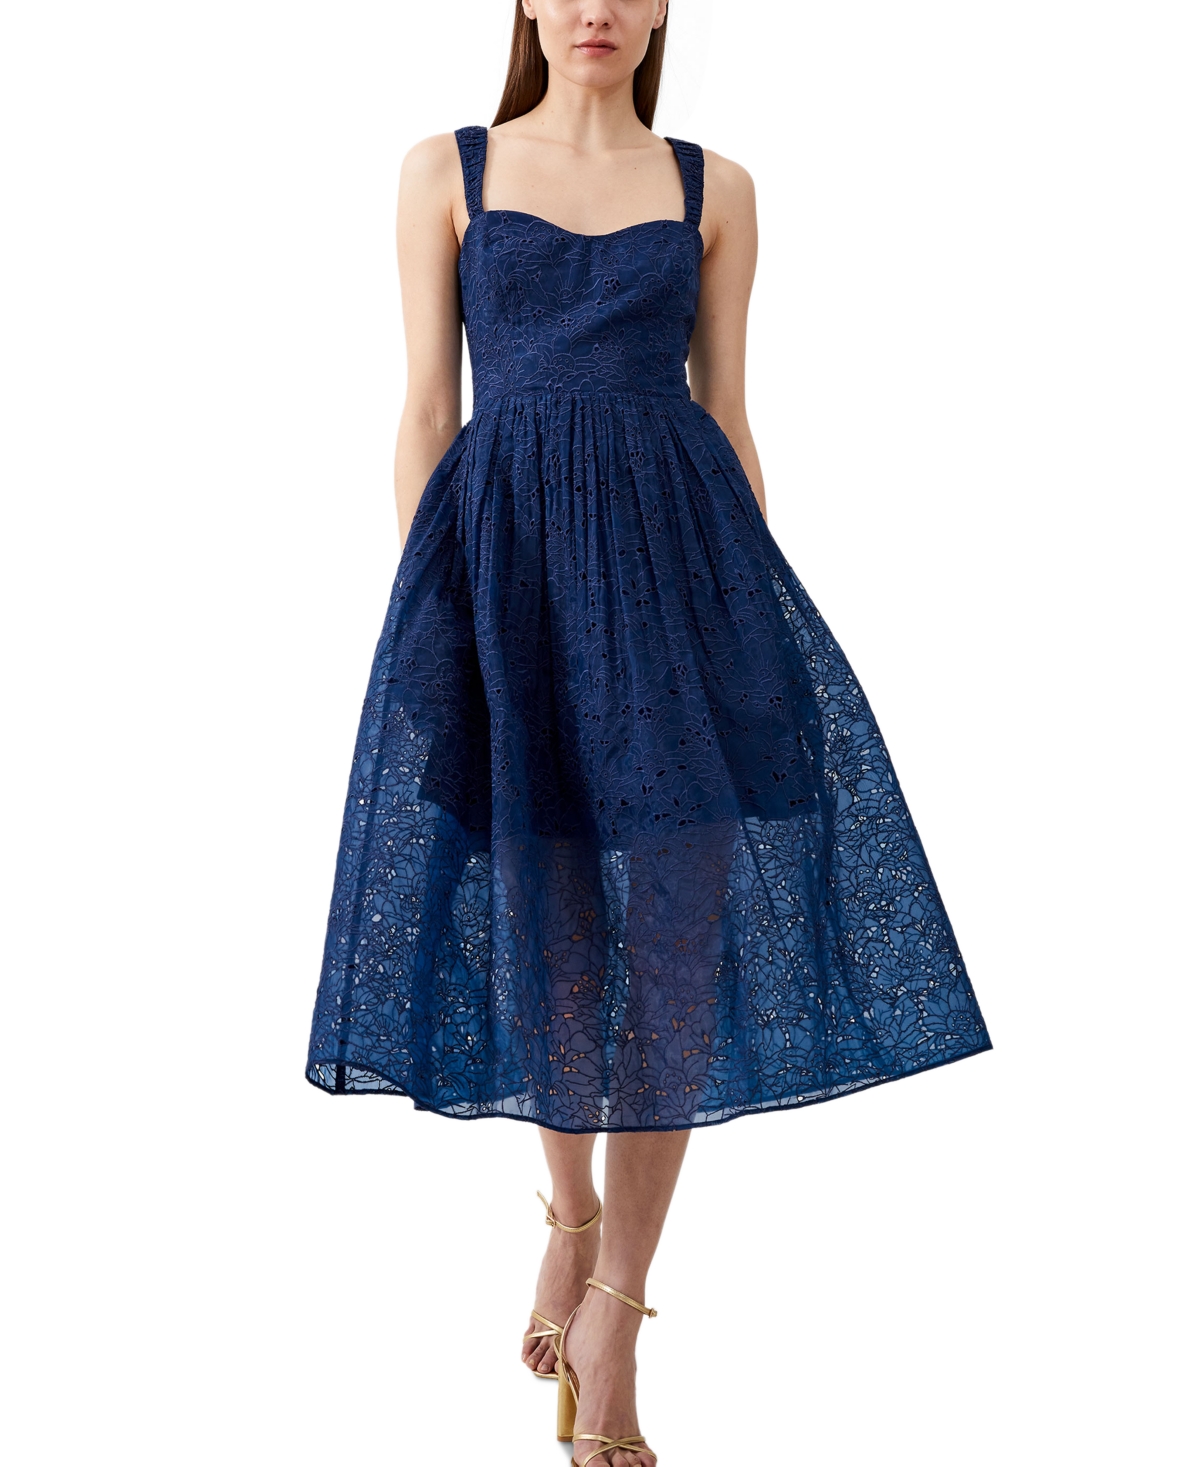 French Connection Sleeveless Lace Midi Dress In Midnight Blue